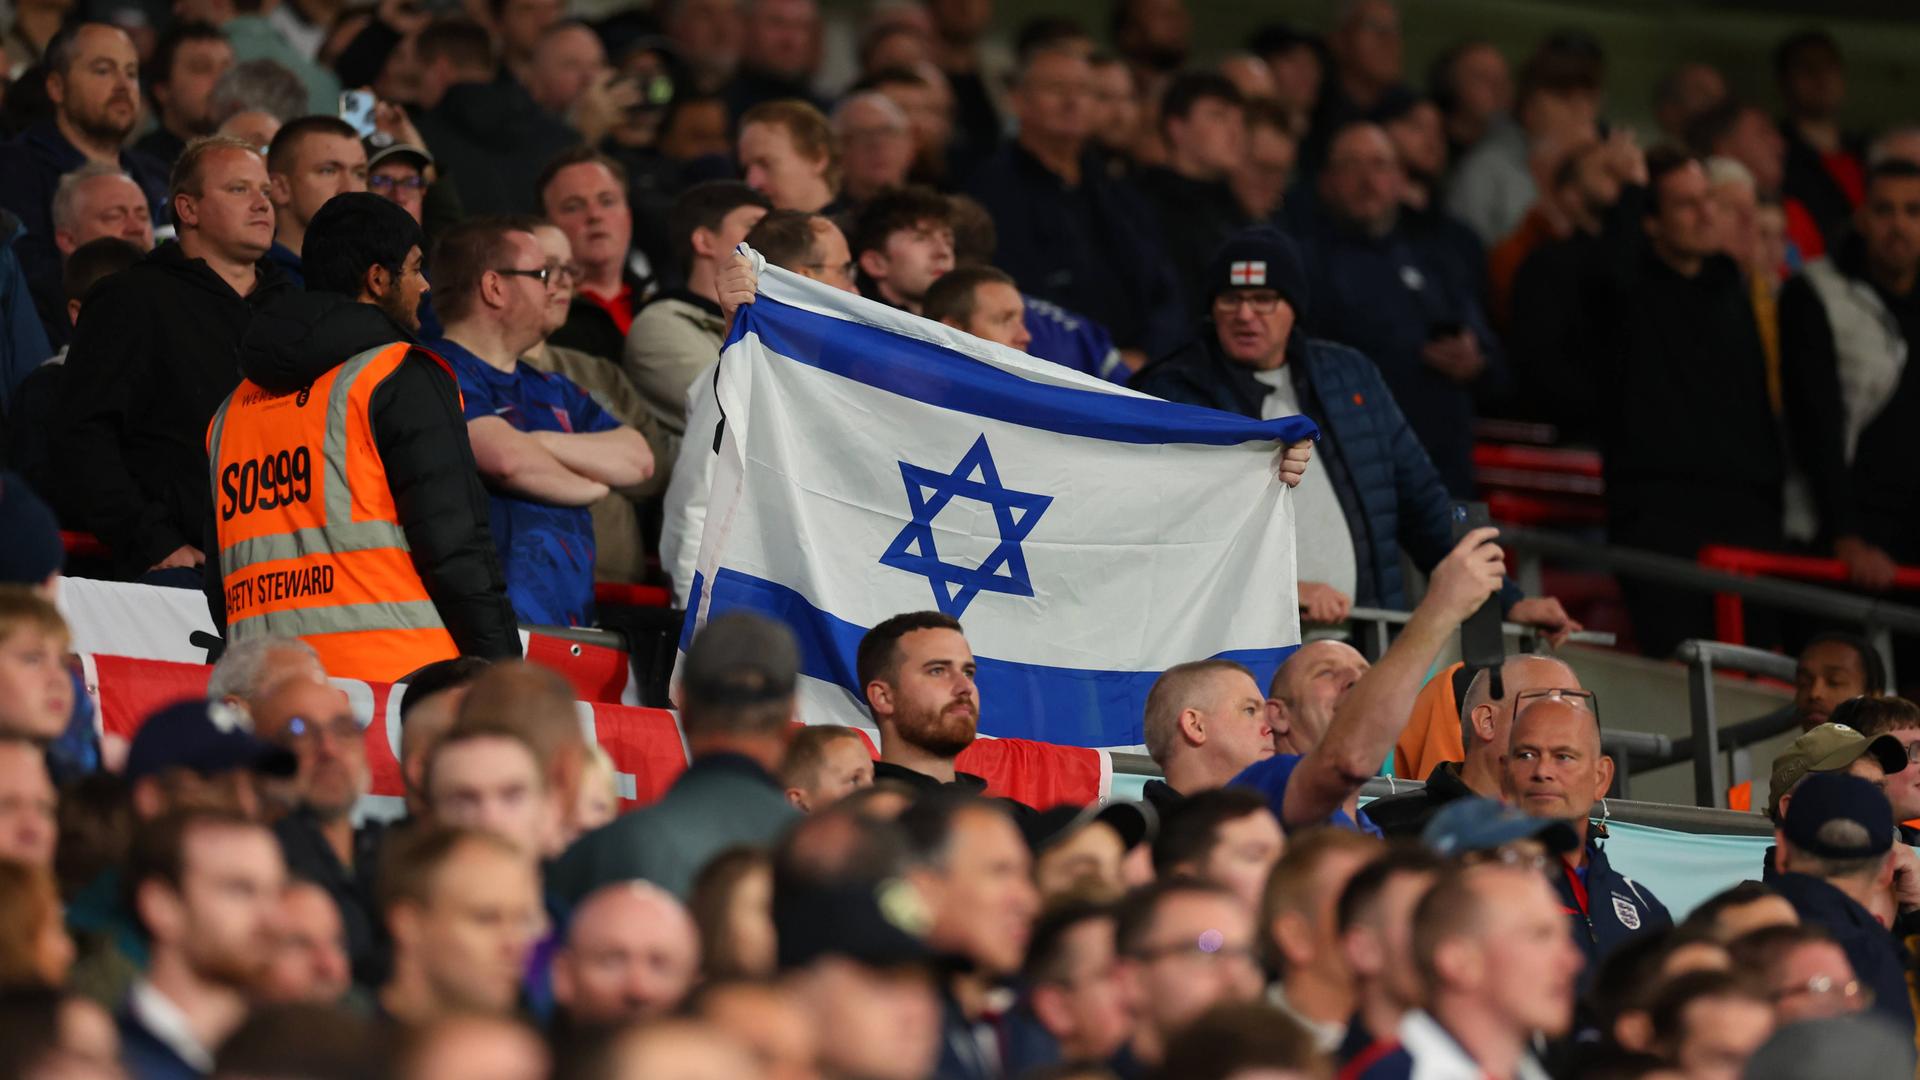 RECORD DATE NOT STATED 13th October 2023 Wembley Stadium, London, England International Football Friendly, England versus Australia A Israel flag is held up by a fan PUBLICATIONxNOTxINxUK ActionPlus12564014 ShaunxBrooks